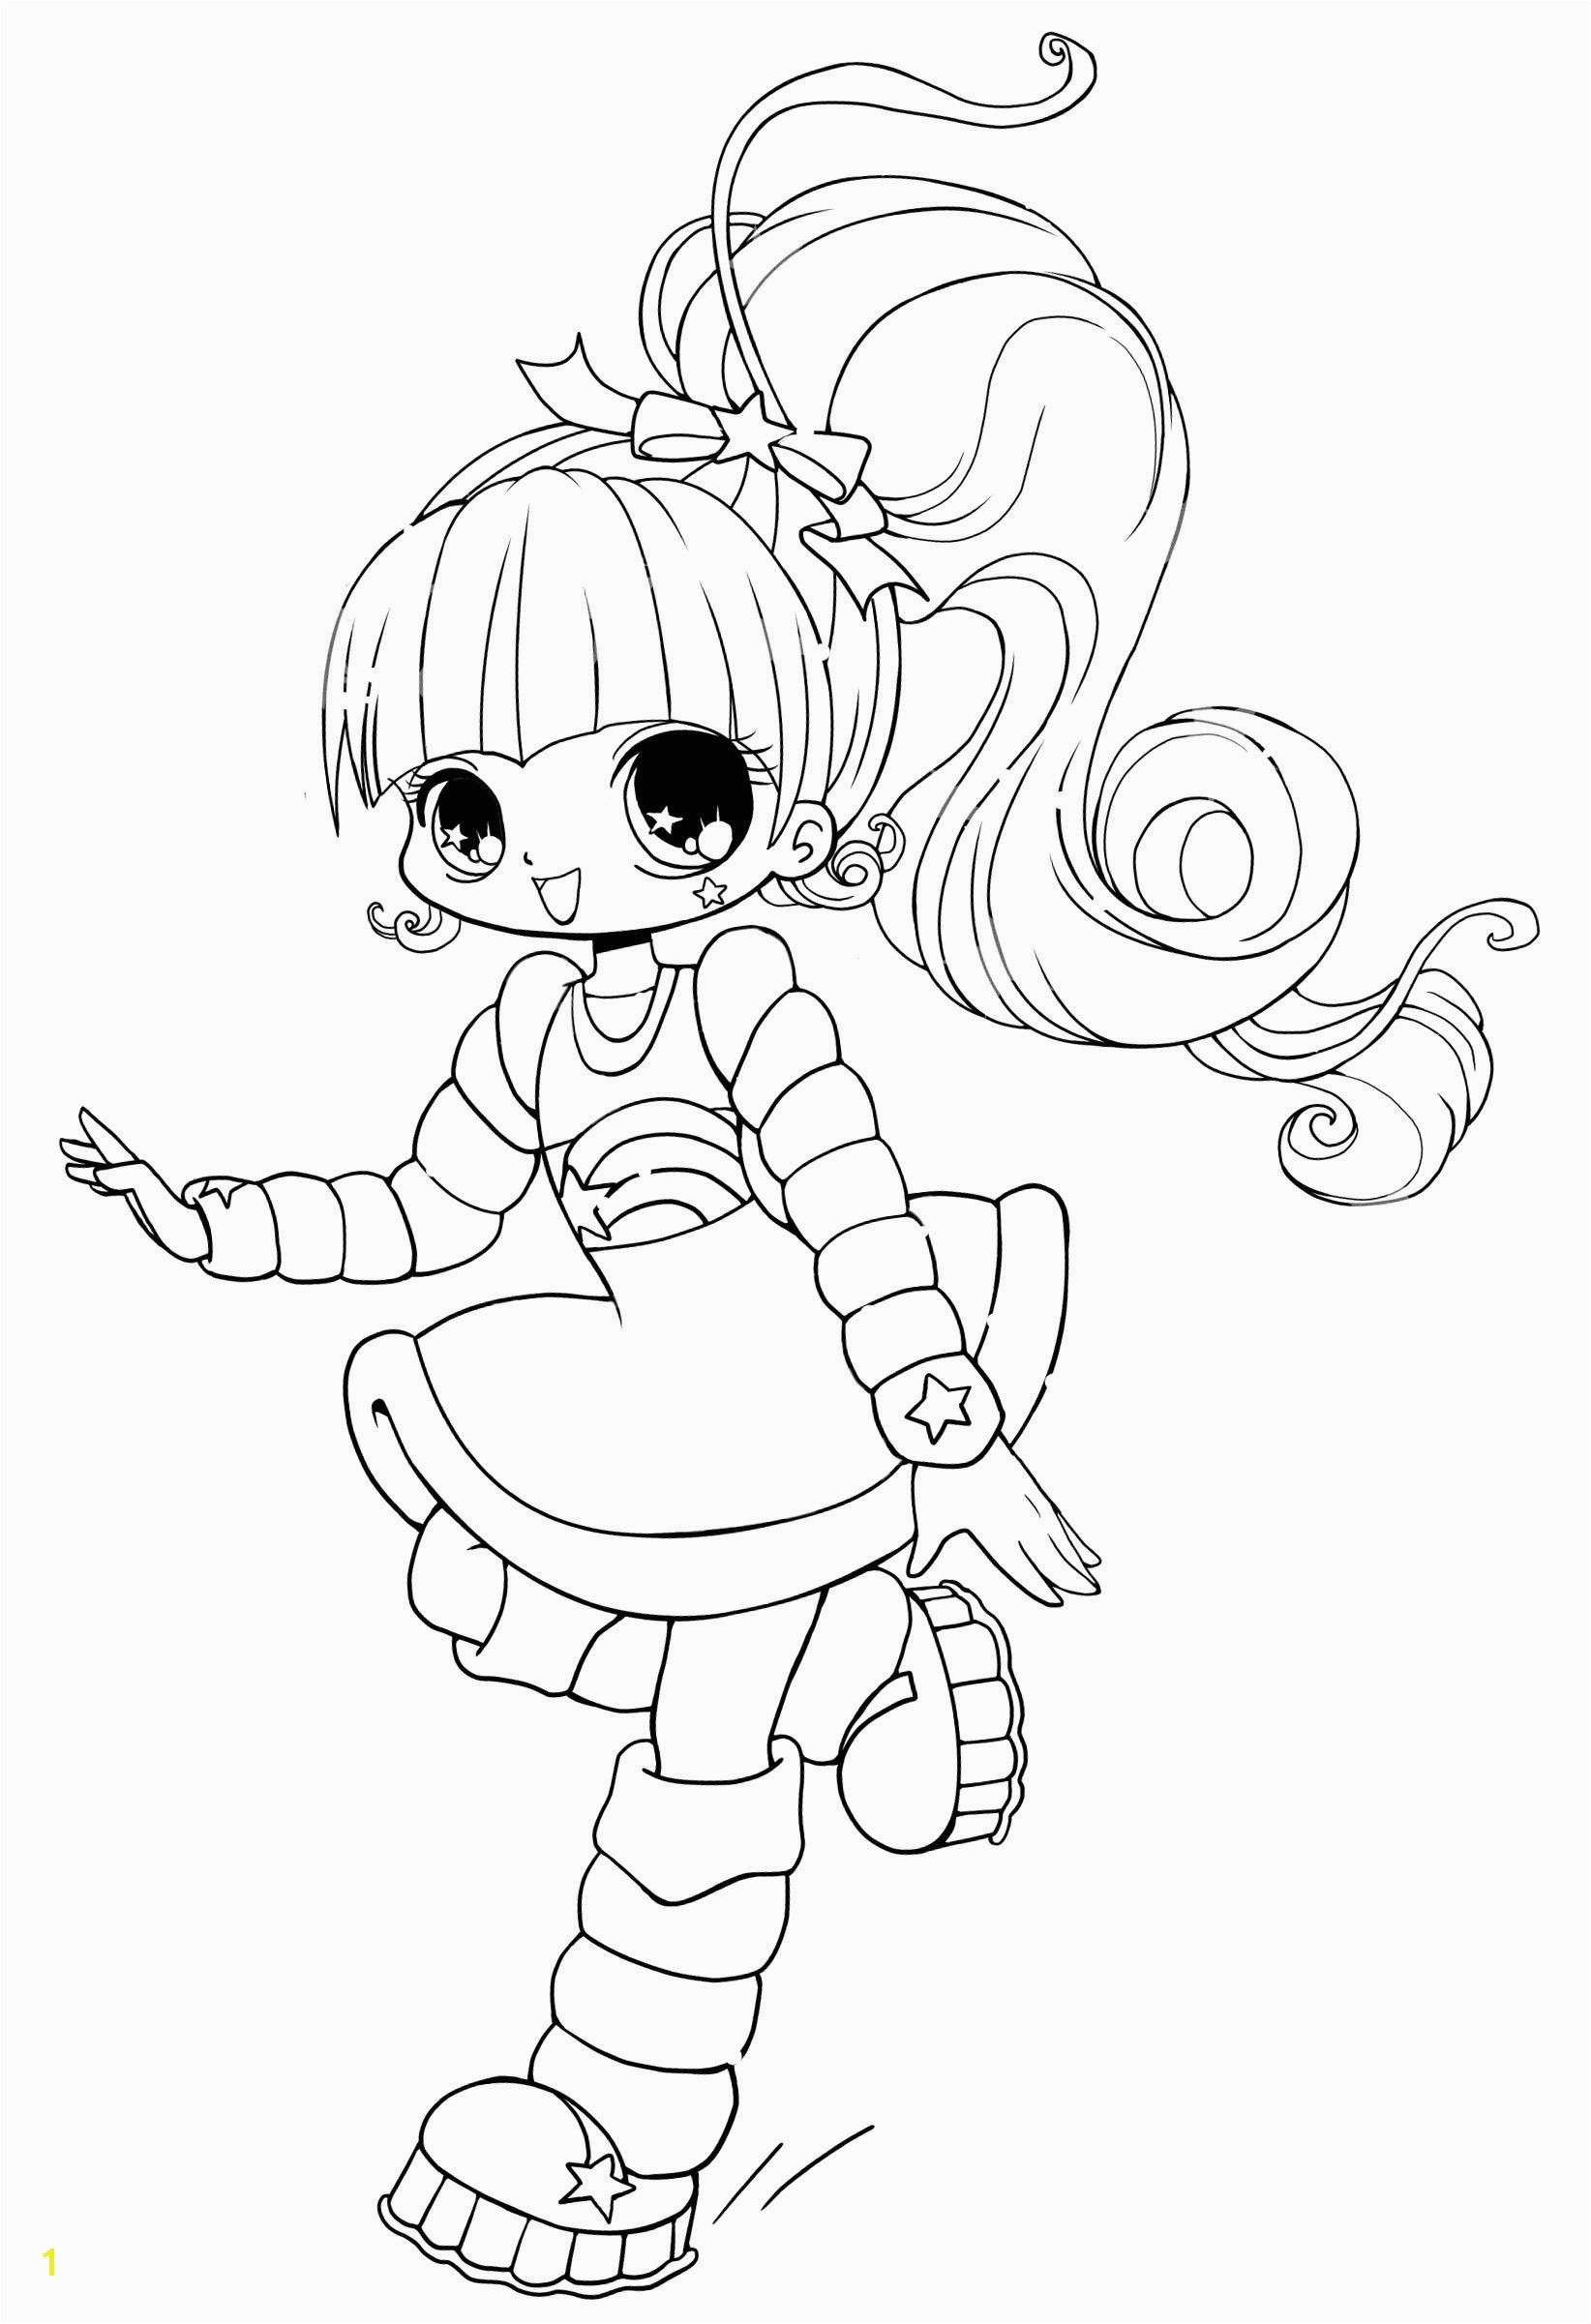 Cute Anime Chibi Coloring Pages Coloring Witch Coloring Page Inspirational Crayola Pages 0d Coloring Page